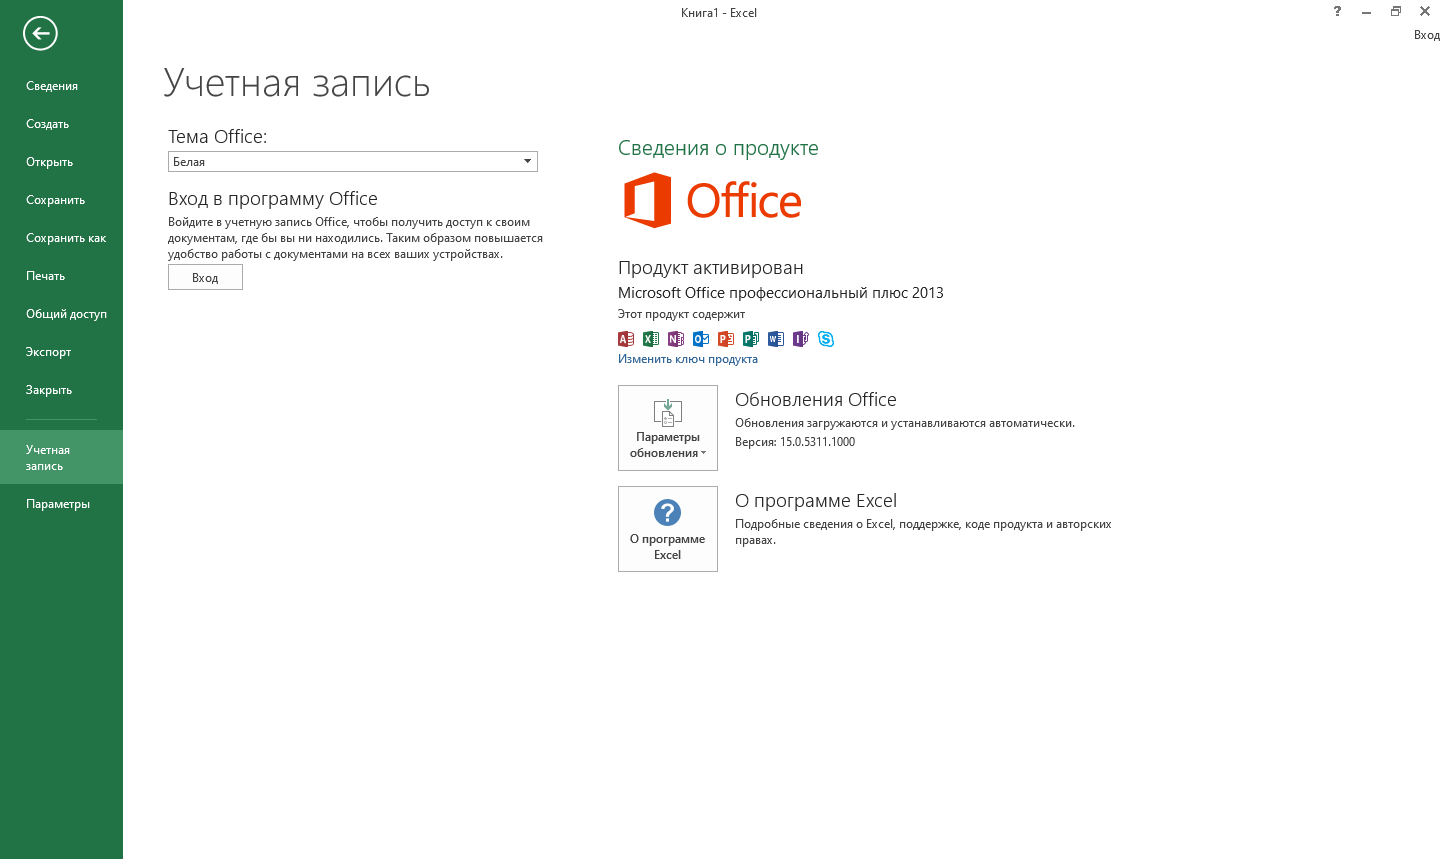 Office 2013 Professional plus activated